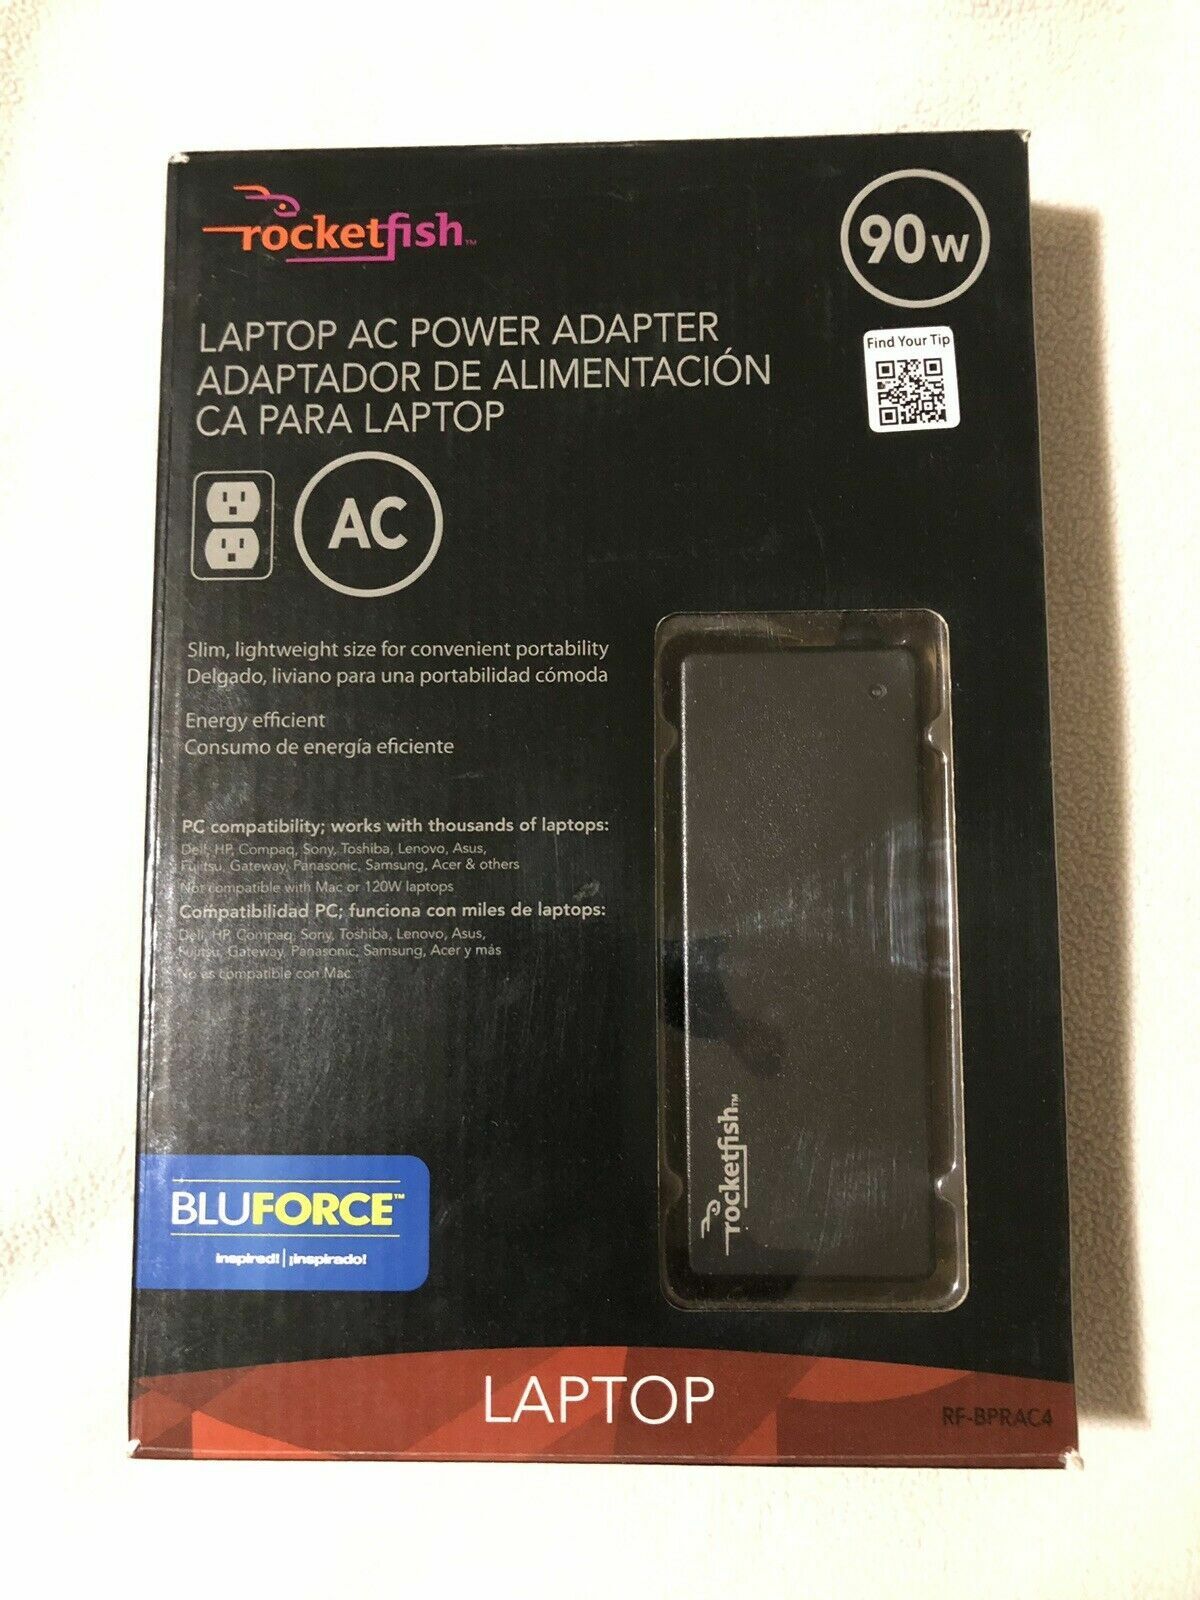 Rocketfish 90w Laptop AC Power Adapter RF-BPRAC4 with 10 tip connectors